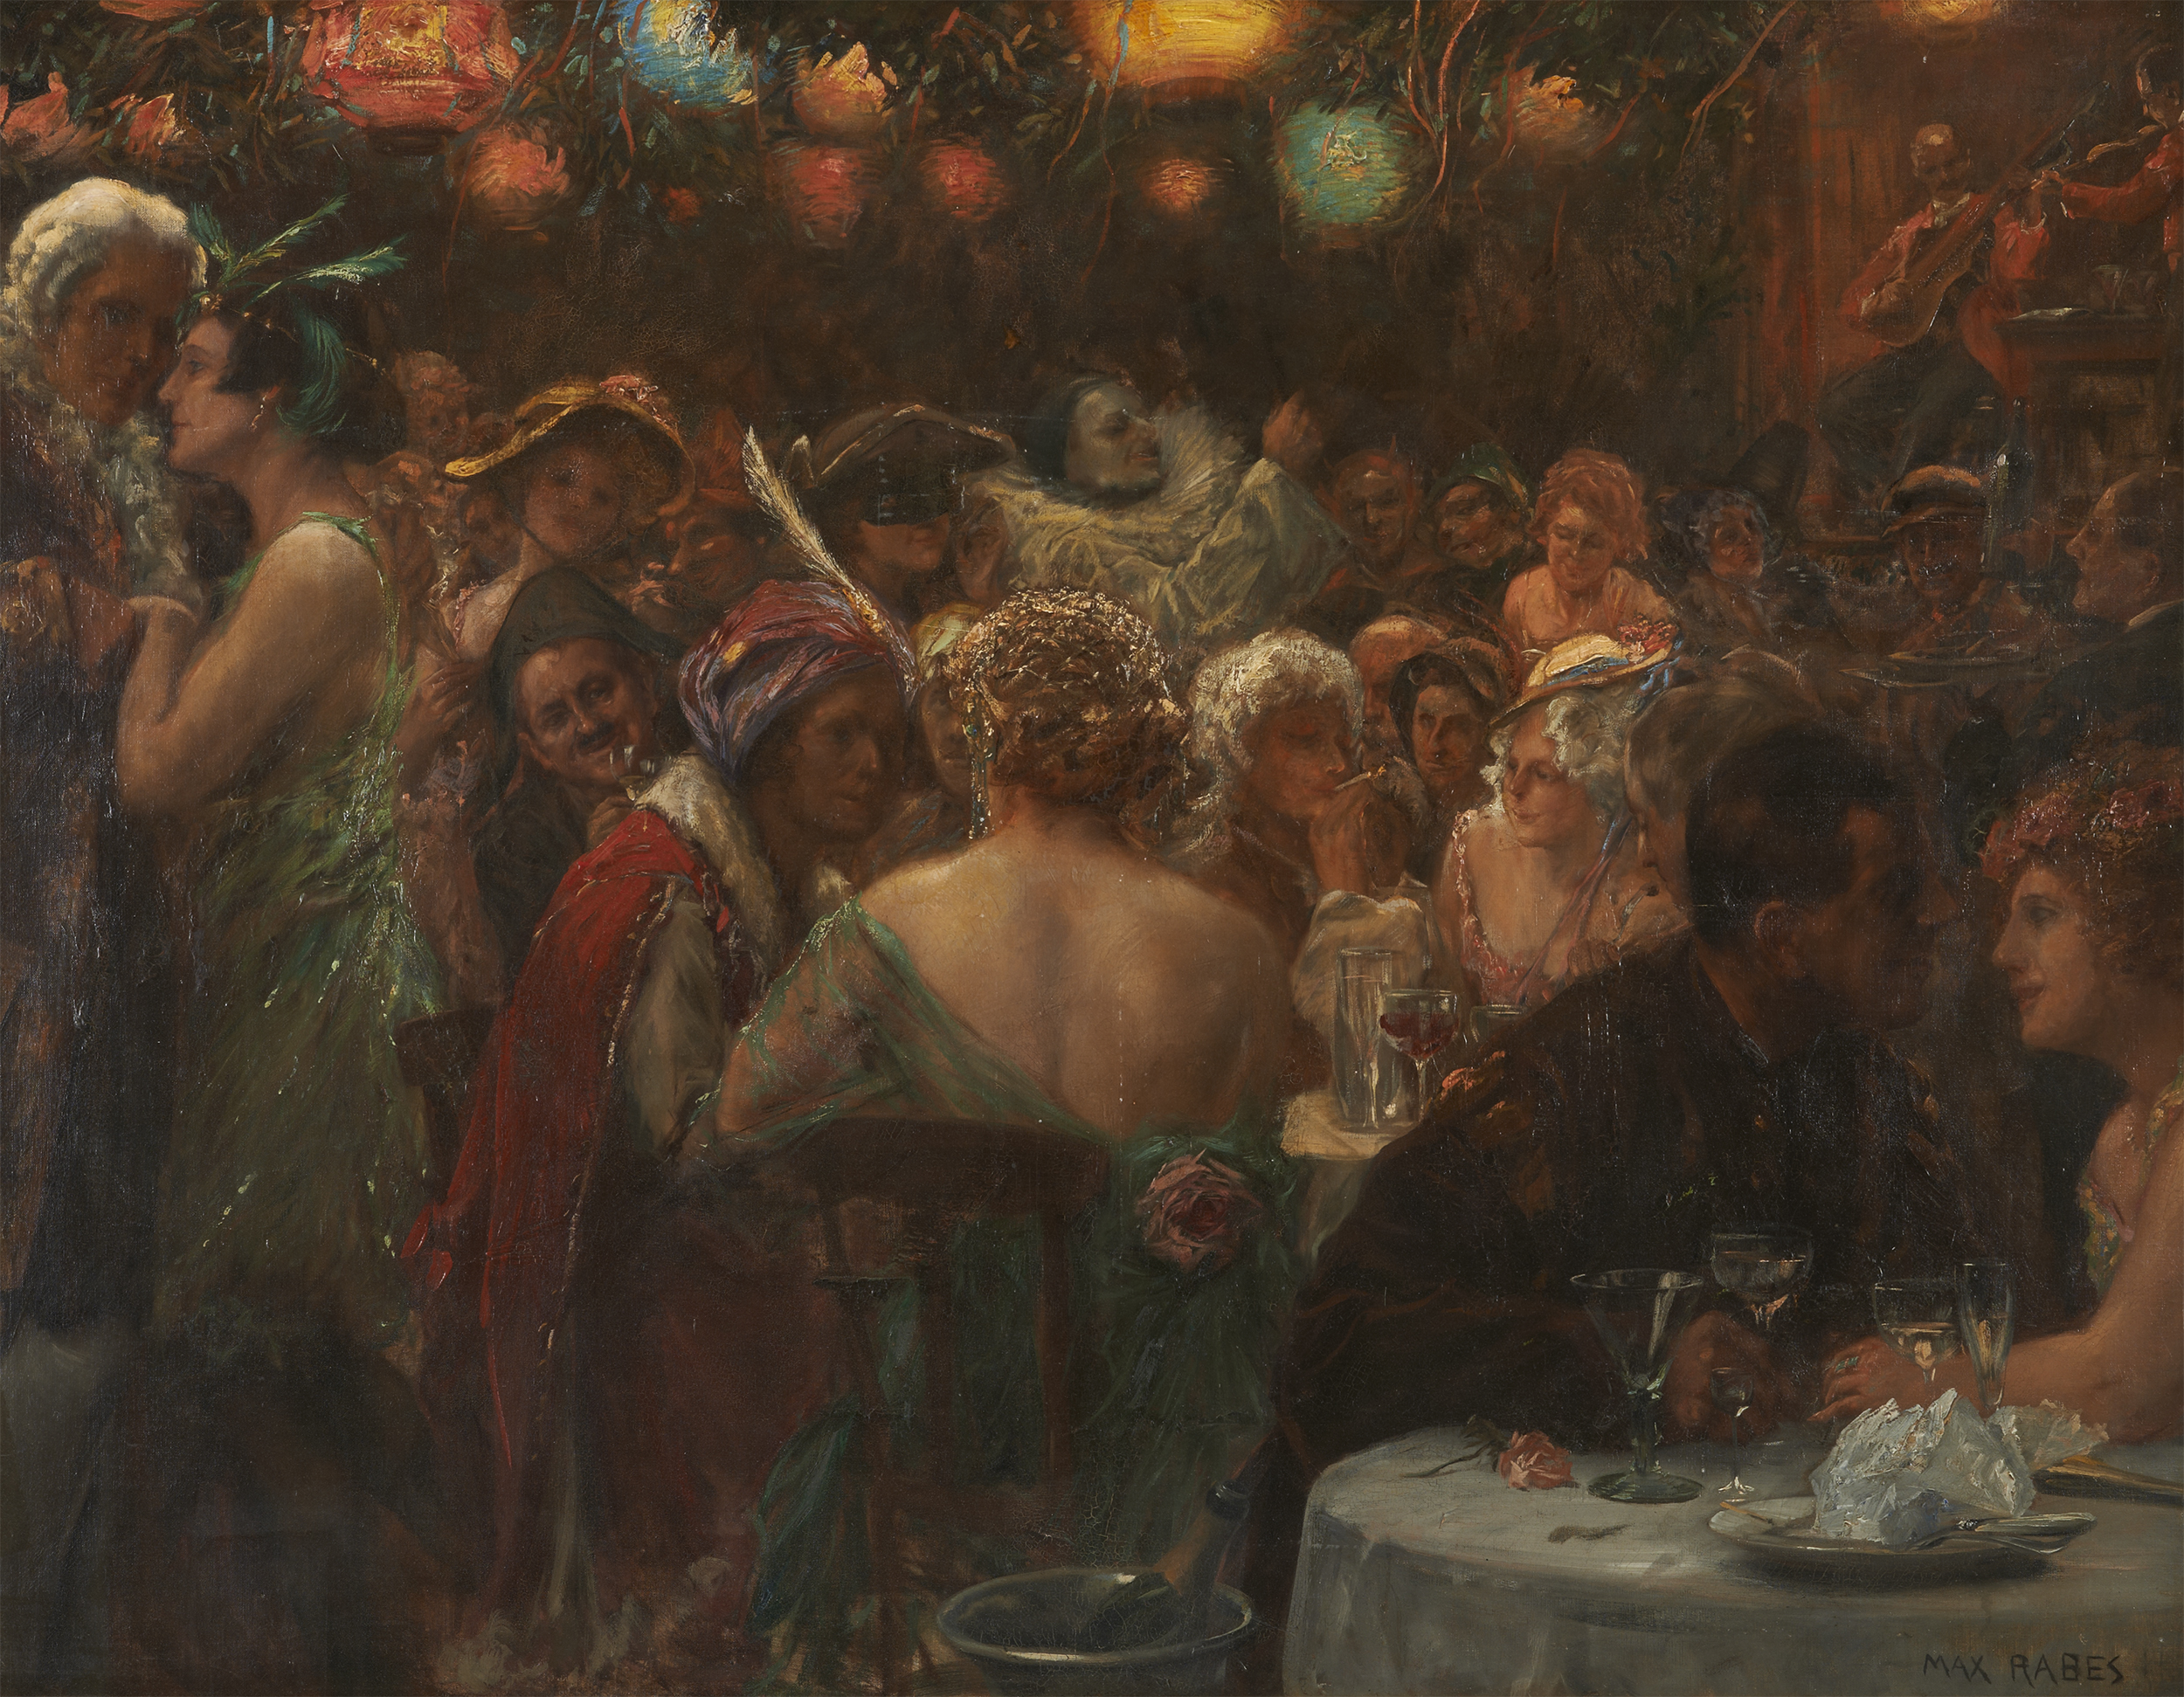 A painting by Max Friedrich Rabes (German, 1868-1944) ‘The Costume Ball,’ oil on canvas, 46 3/4in x 61in, sold for $49,200. New Orleans Auction Gallery images